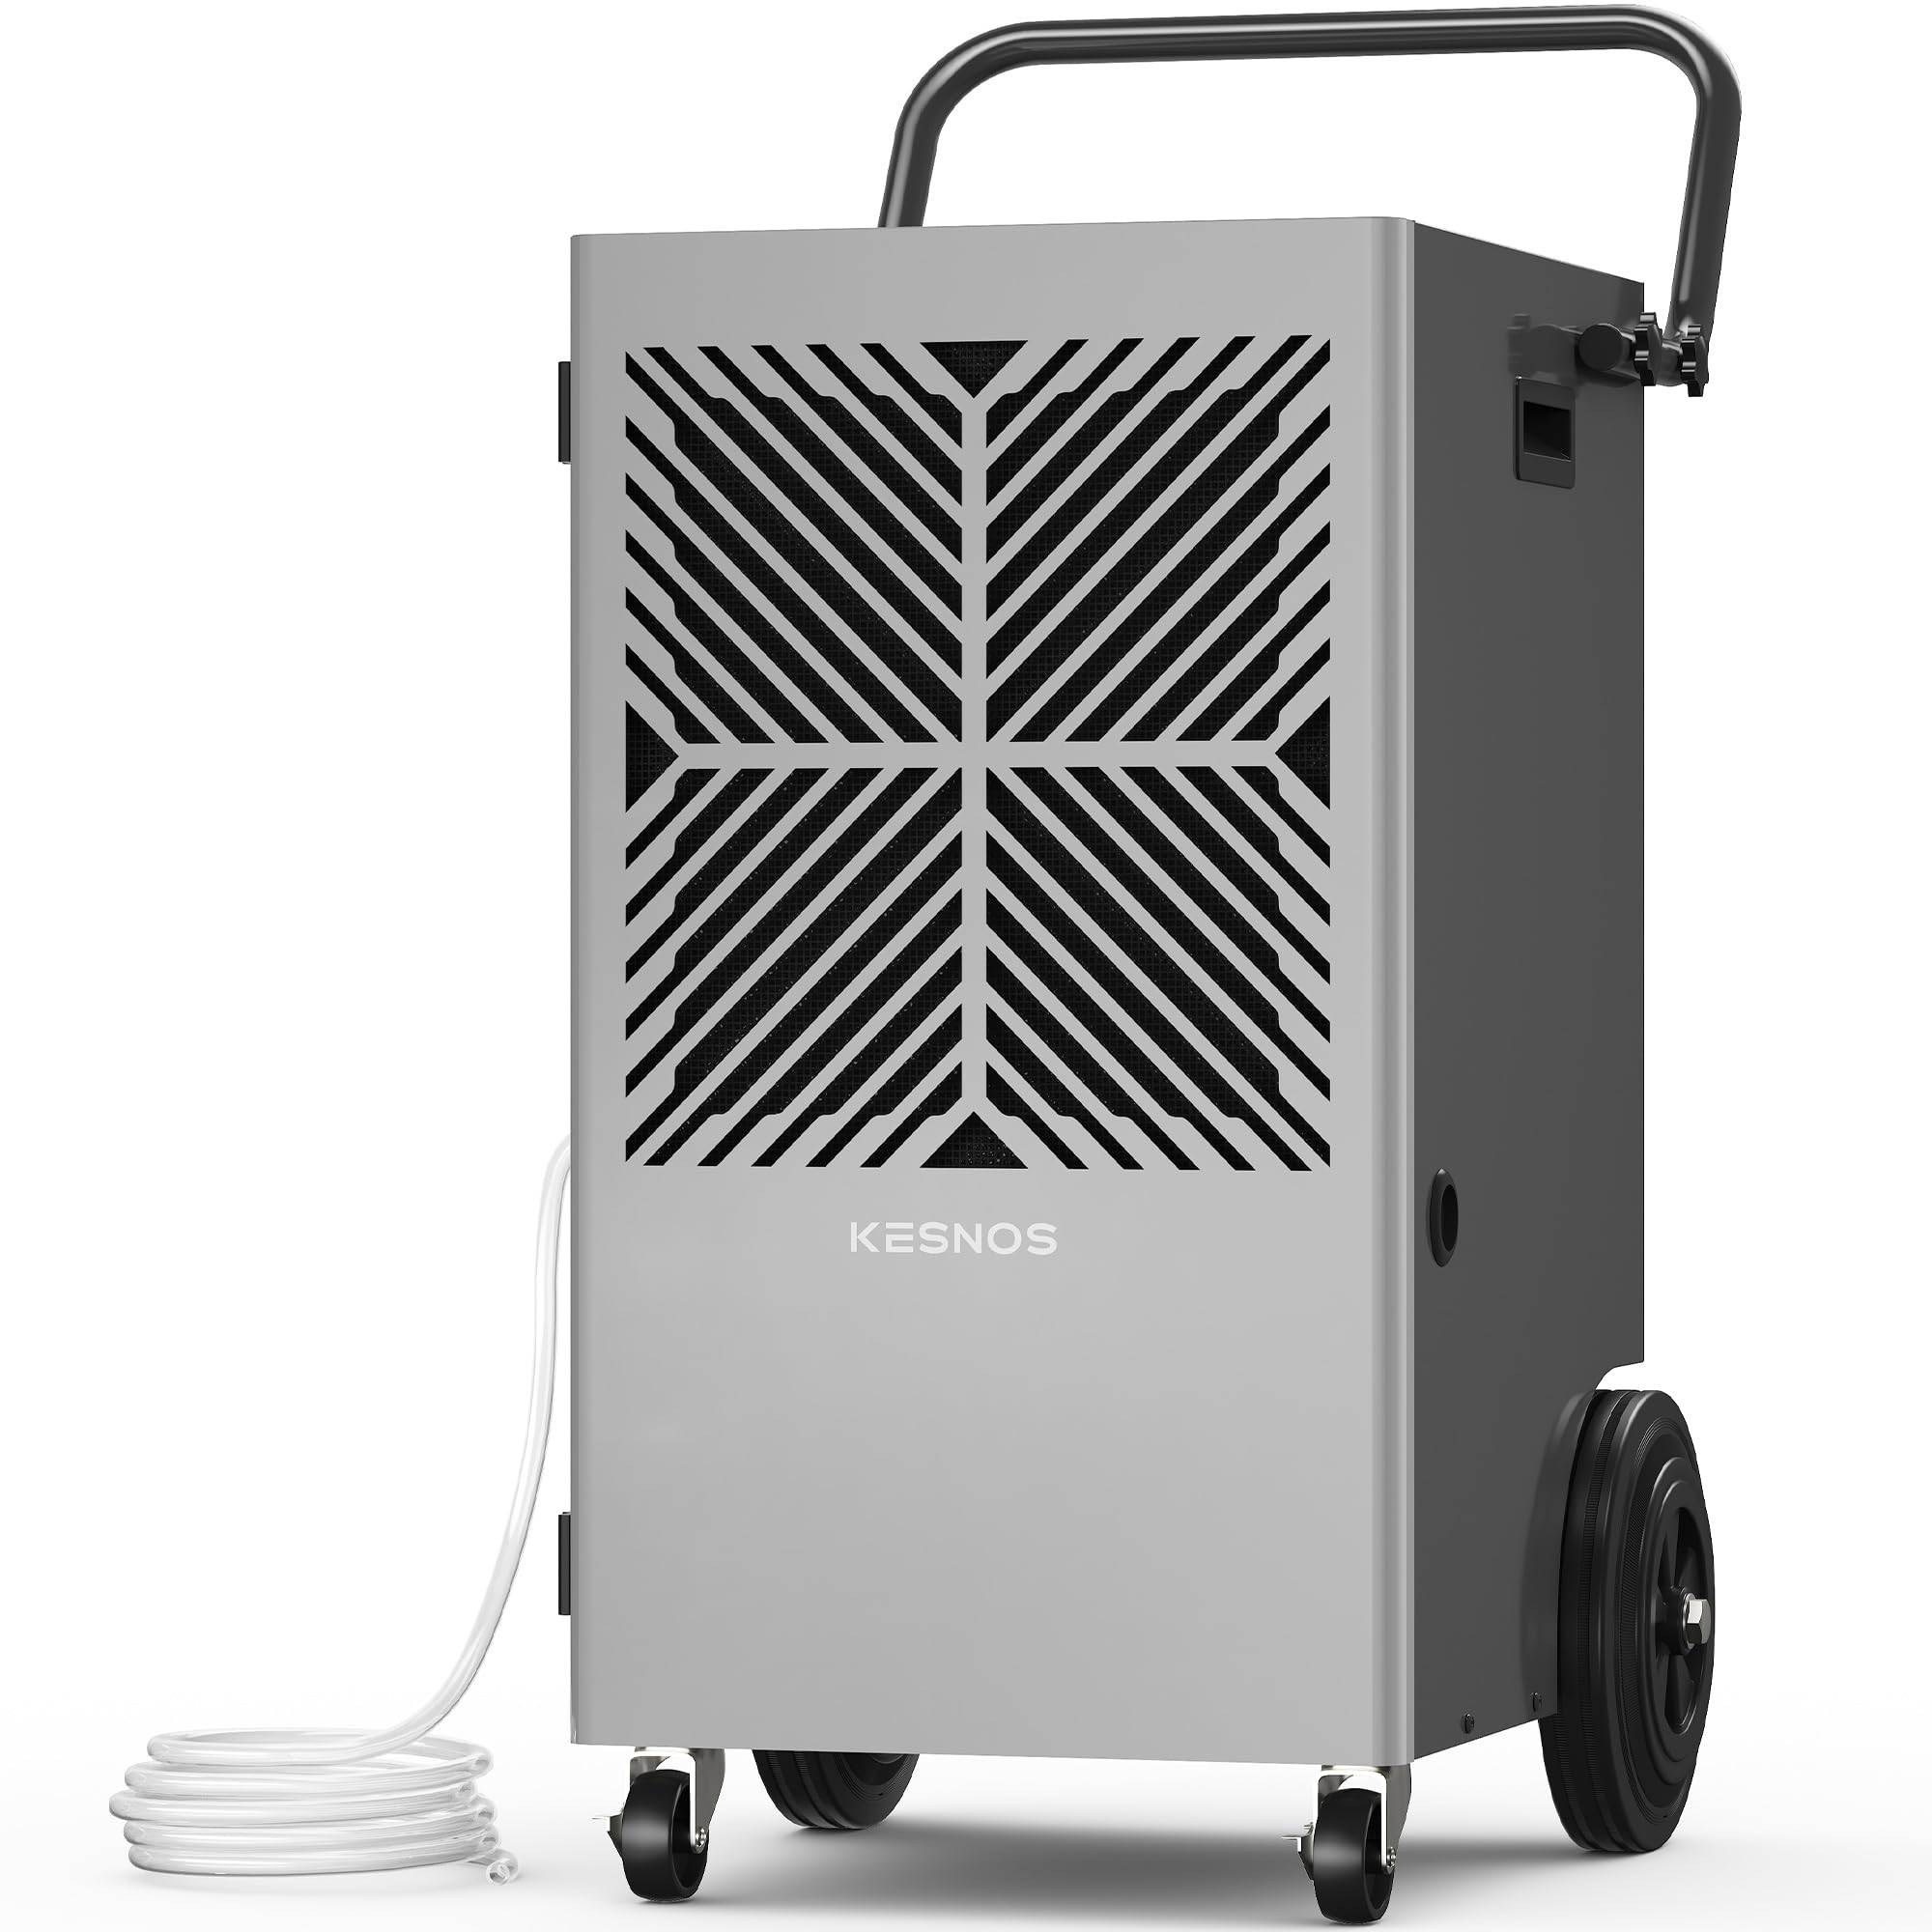 Kesnos 155 Pints Commercial Dehumidifier with Pump – Dehumidifier with Drain Hose and 24 Hr Timer in Large Space Up to 7500 Sq. Ft. – Ideal for Basements, Industrial Spaces and Job Sites